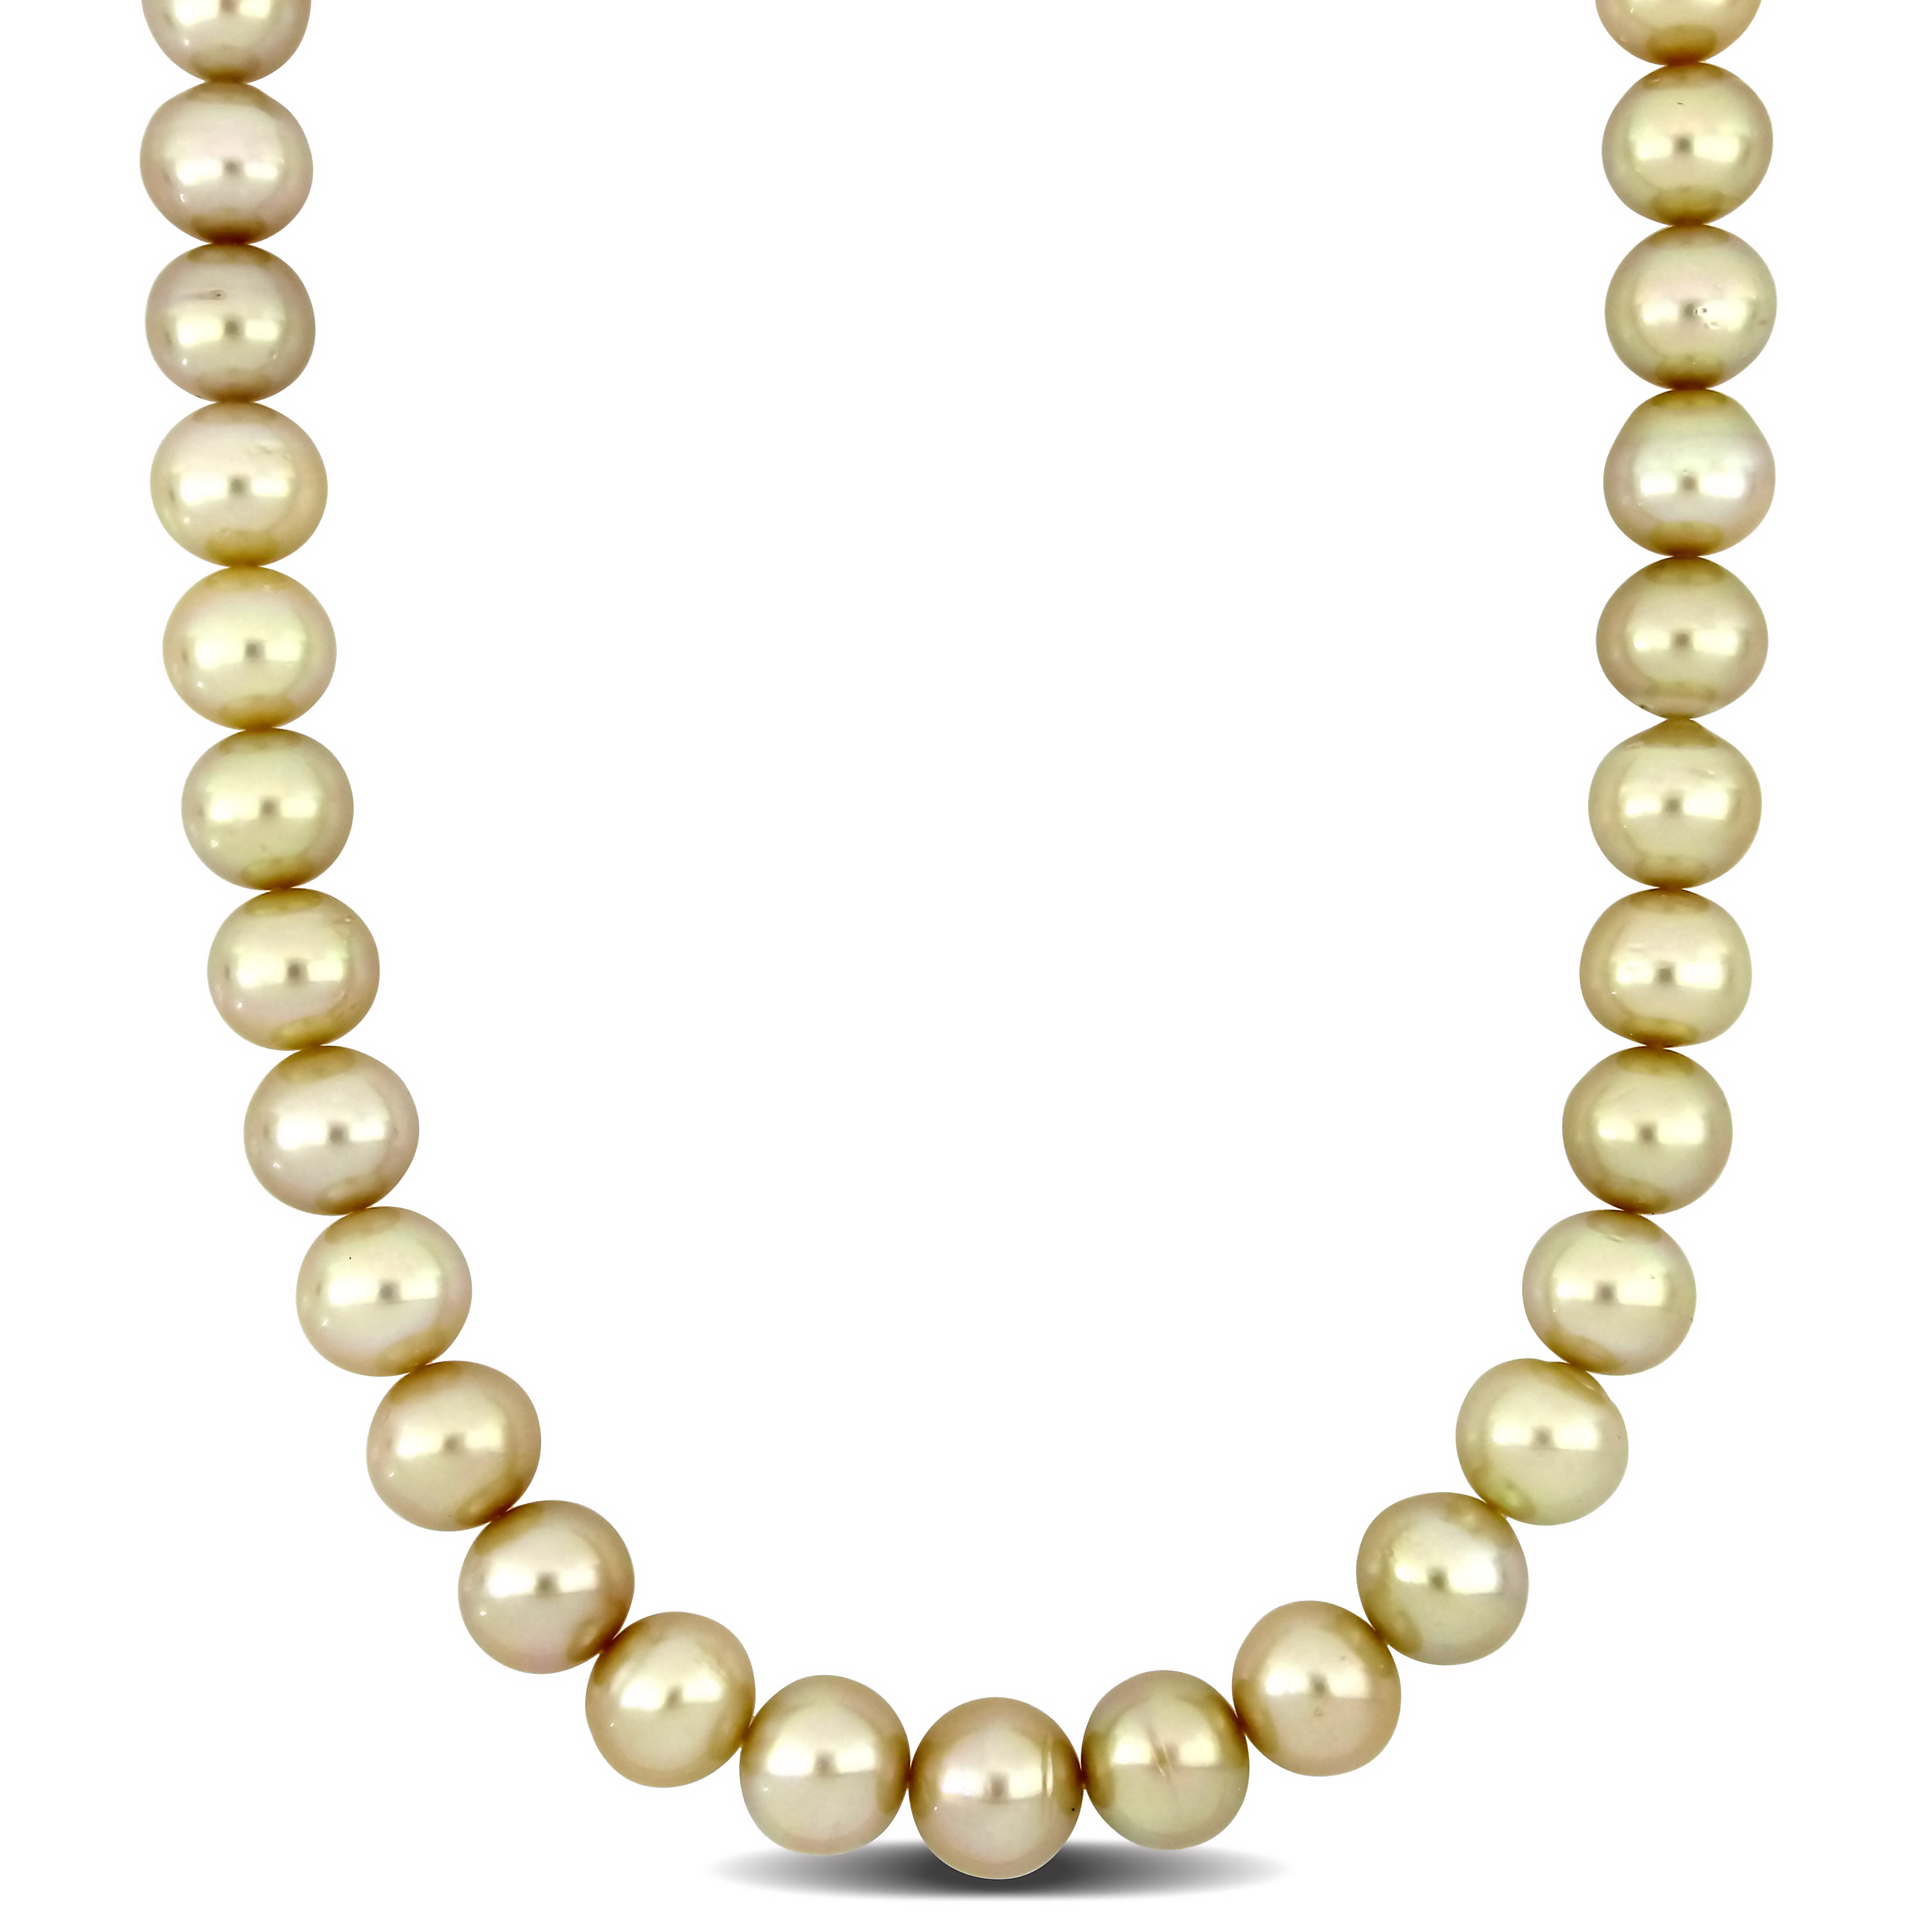 11-12 MM Golden South Sea Cultured Pearl Strand Necklace with 14k Yellow Gold Corrugated Ball Clasp - 18 in